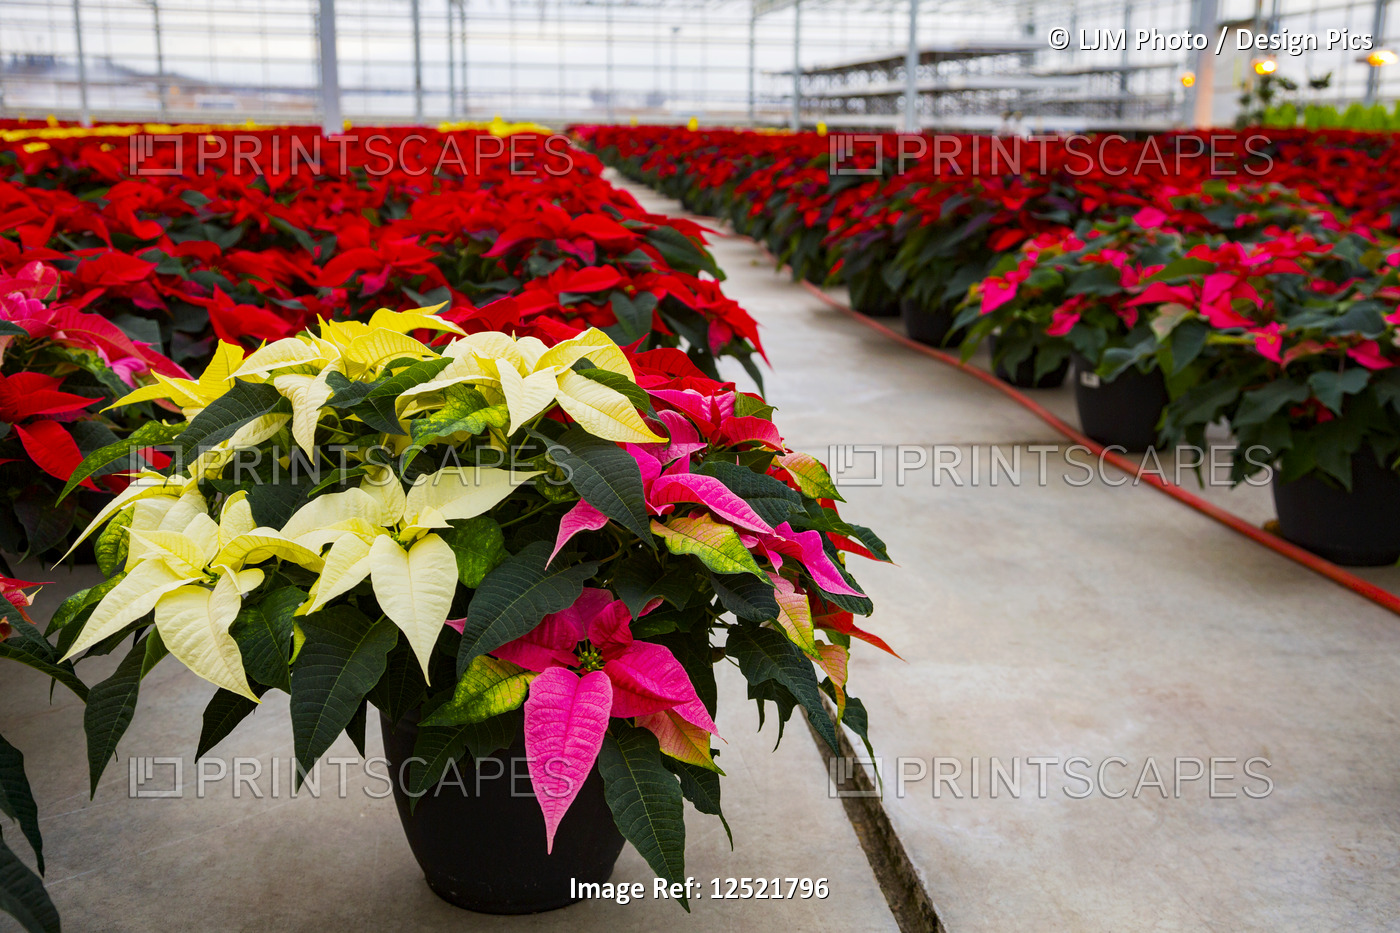 Rows of multi-coloured poinsettias that were grown in a greenhouse operation ...